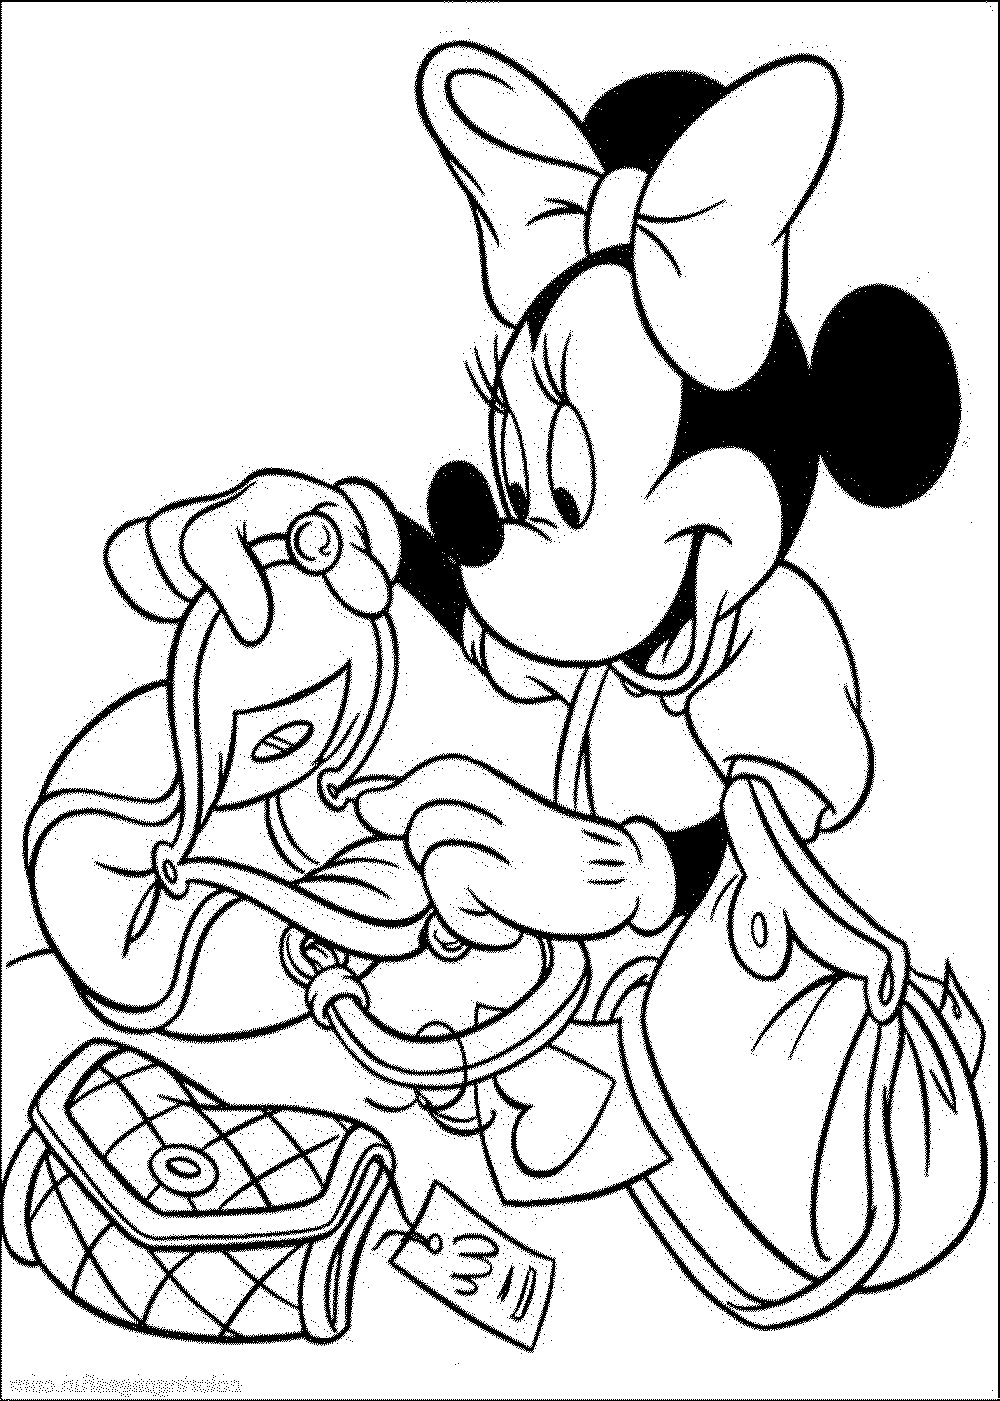 Print & Download - Free Minnie Mouse Coloring Pages